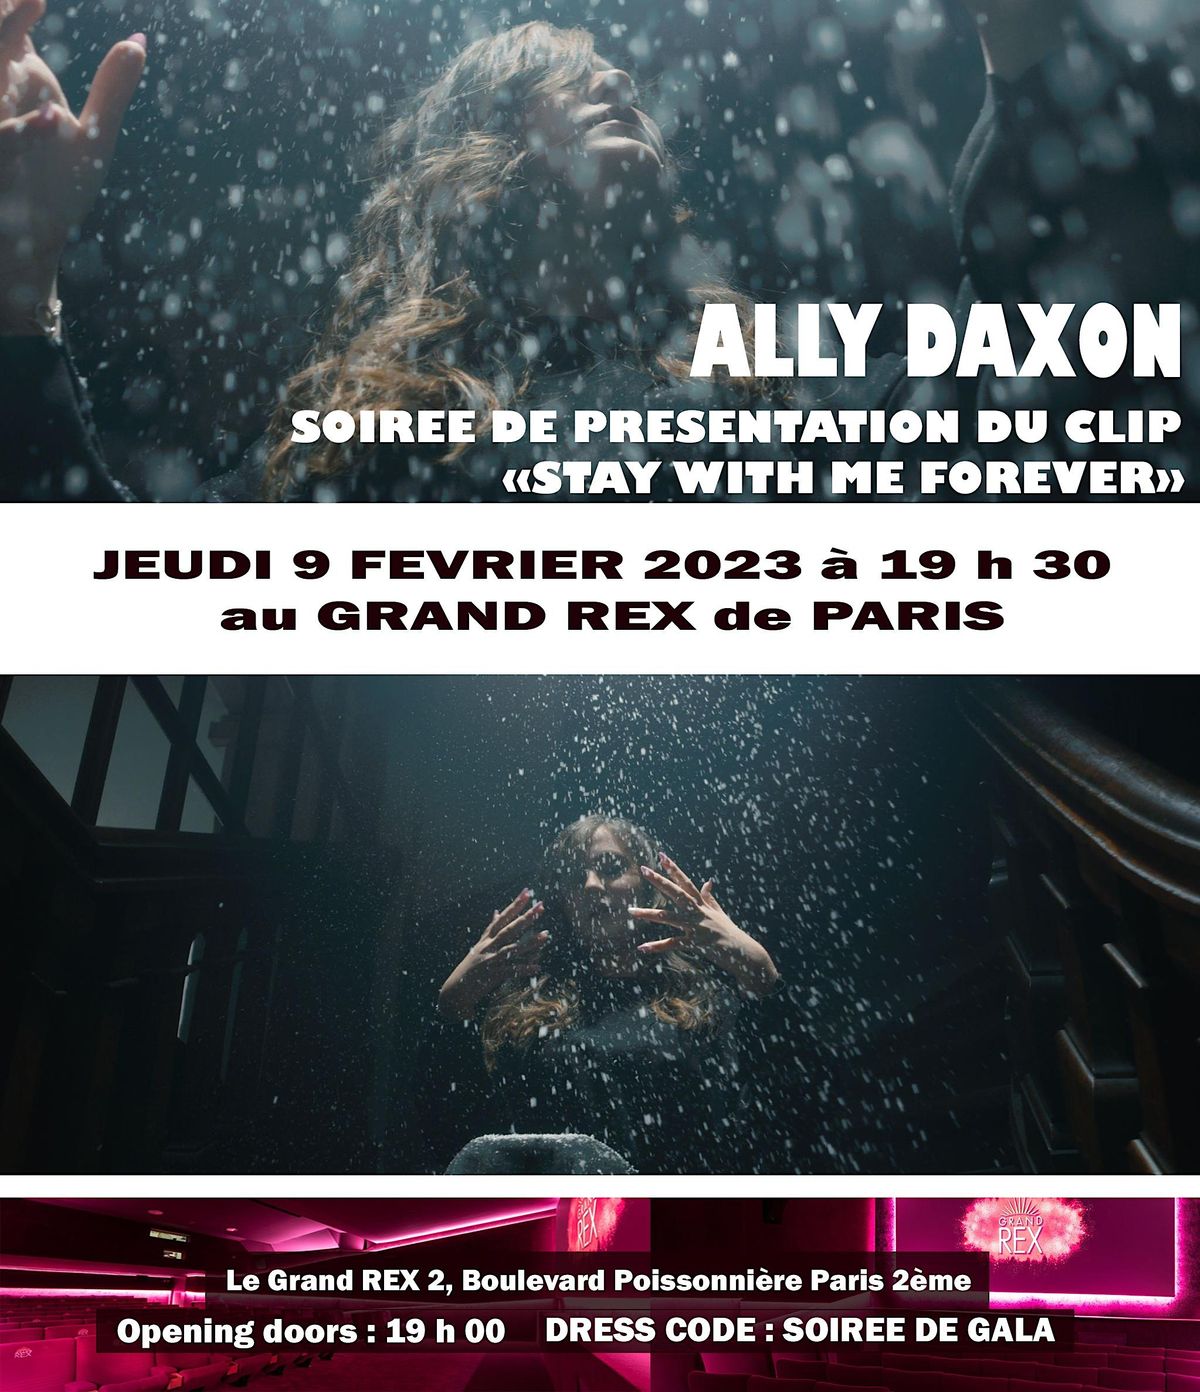 ALLY DAXON au Grand Rex "STAY WITH ME FOREVER"